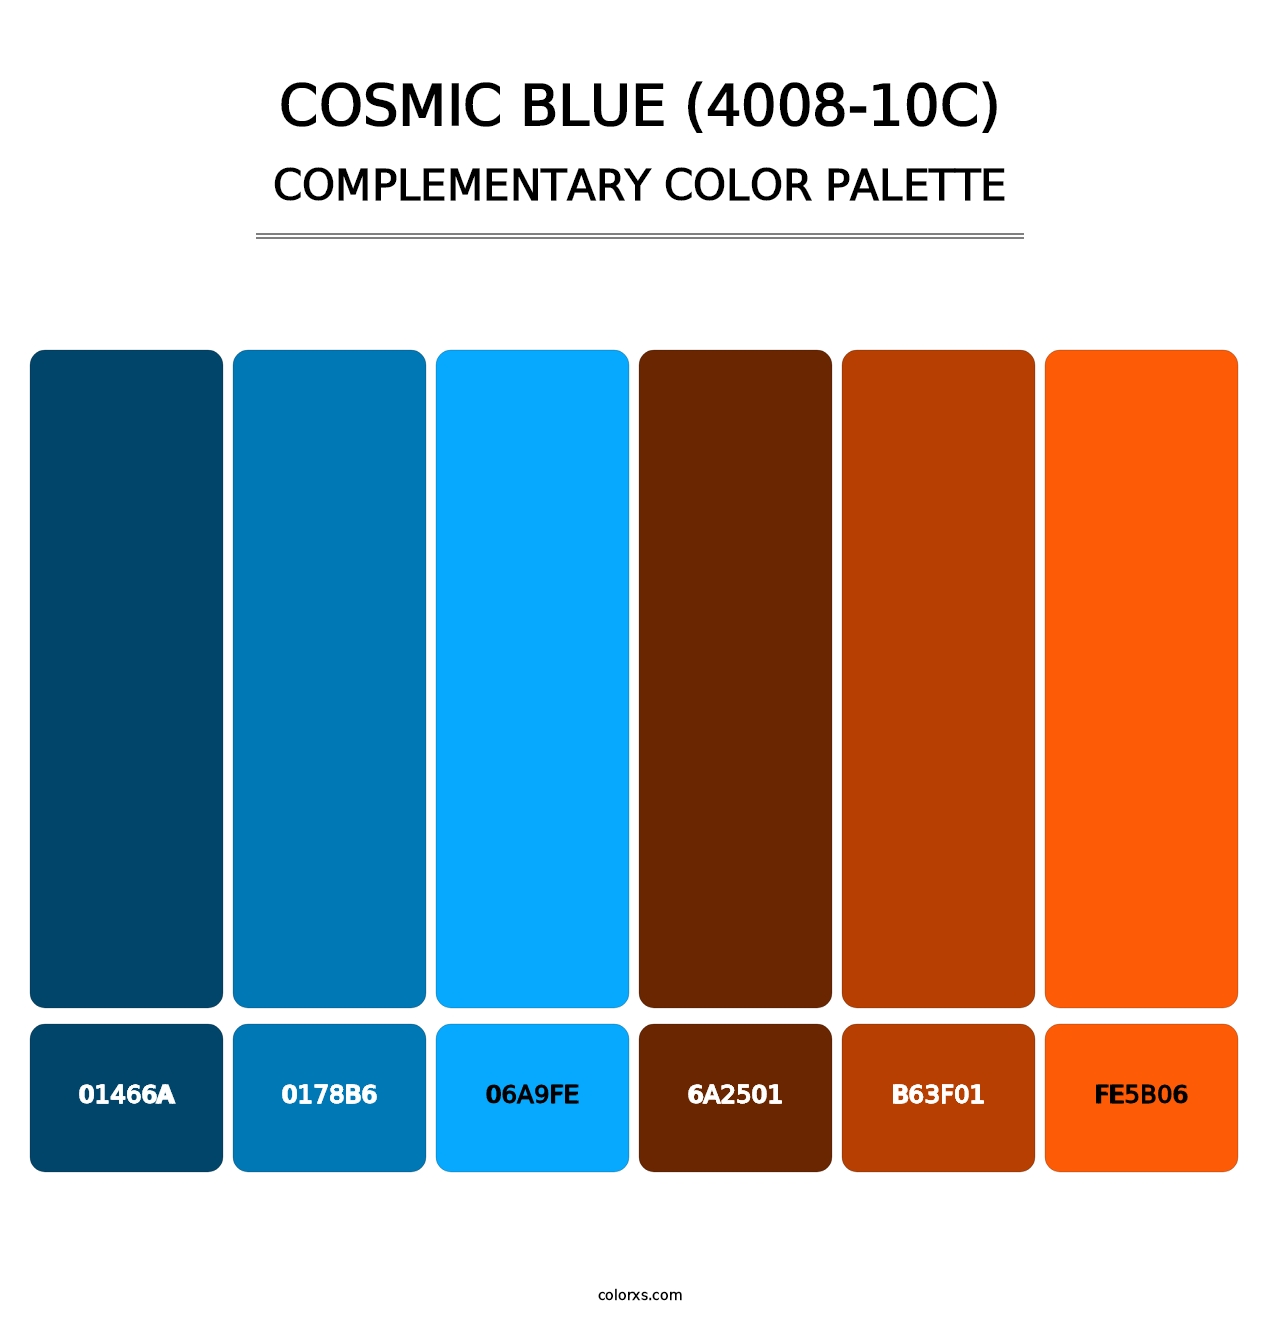 Cosmic Blue (4008-10C) - Complementary Color Palette